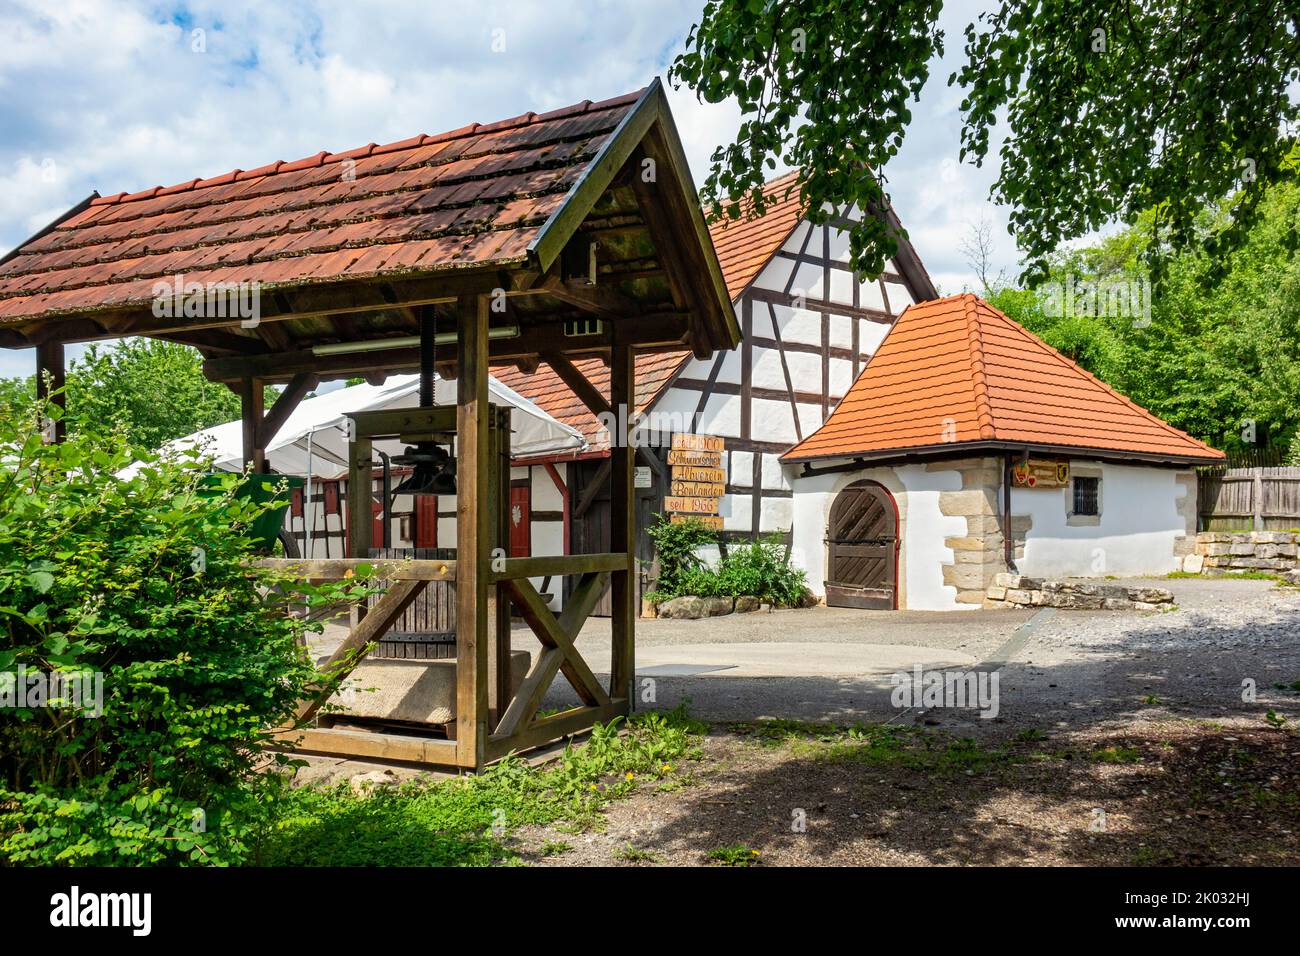 The wine press on the Uhlberg, built in 1718, is now used as the clubhouse of the local Schwäbischer Albverein Bonlanden group. Stock Photo